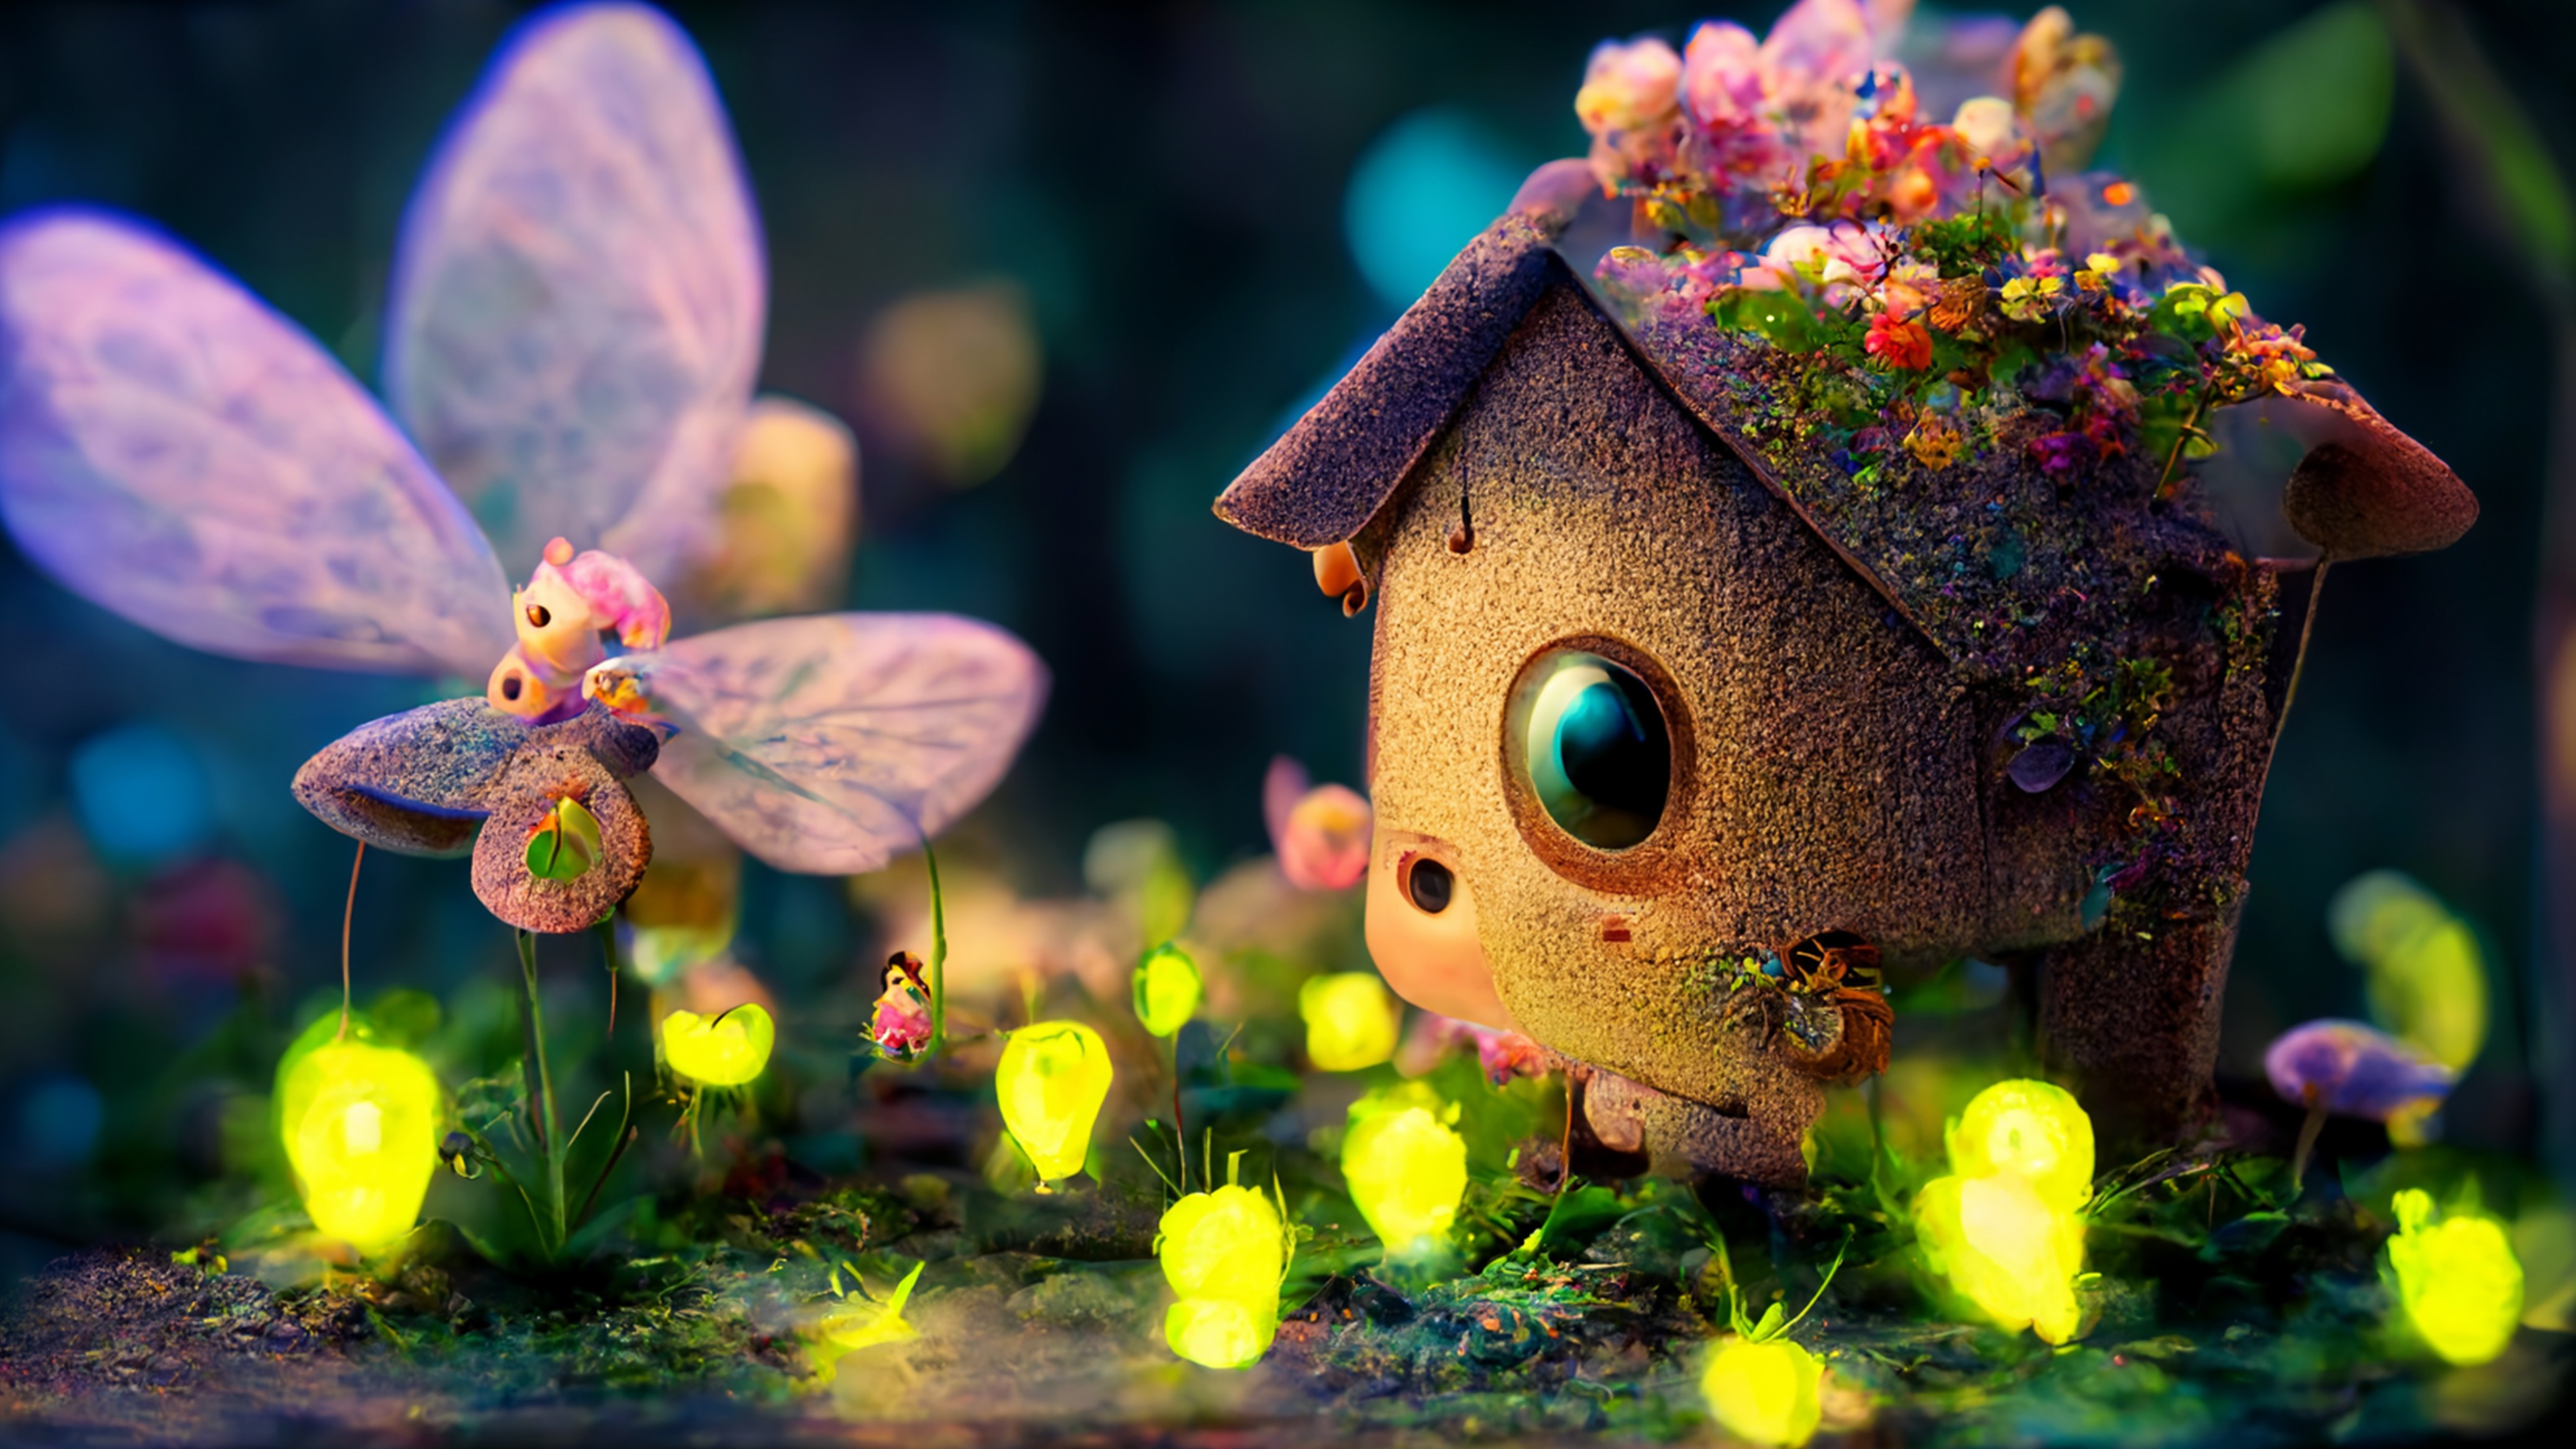 HD wallpaper, Macro, Magical Forest, Cute House, Midjourney, Colorful Background, Fairy House, Cute Art